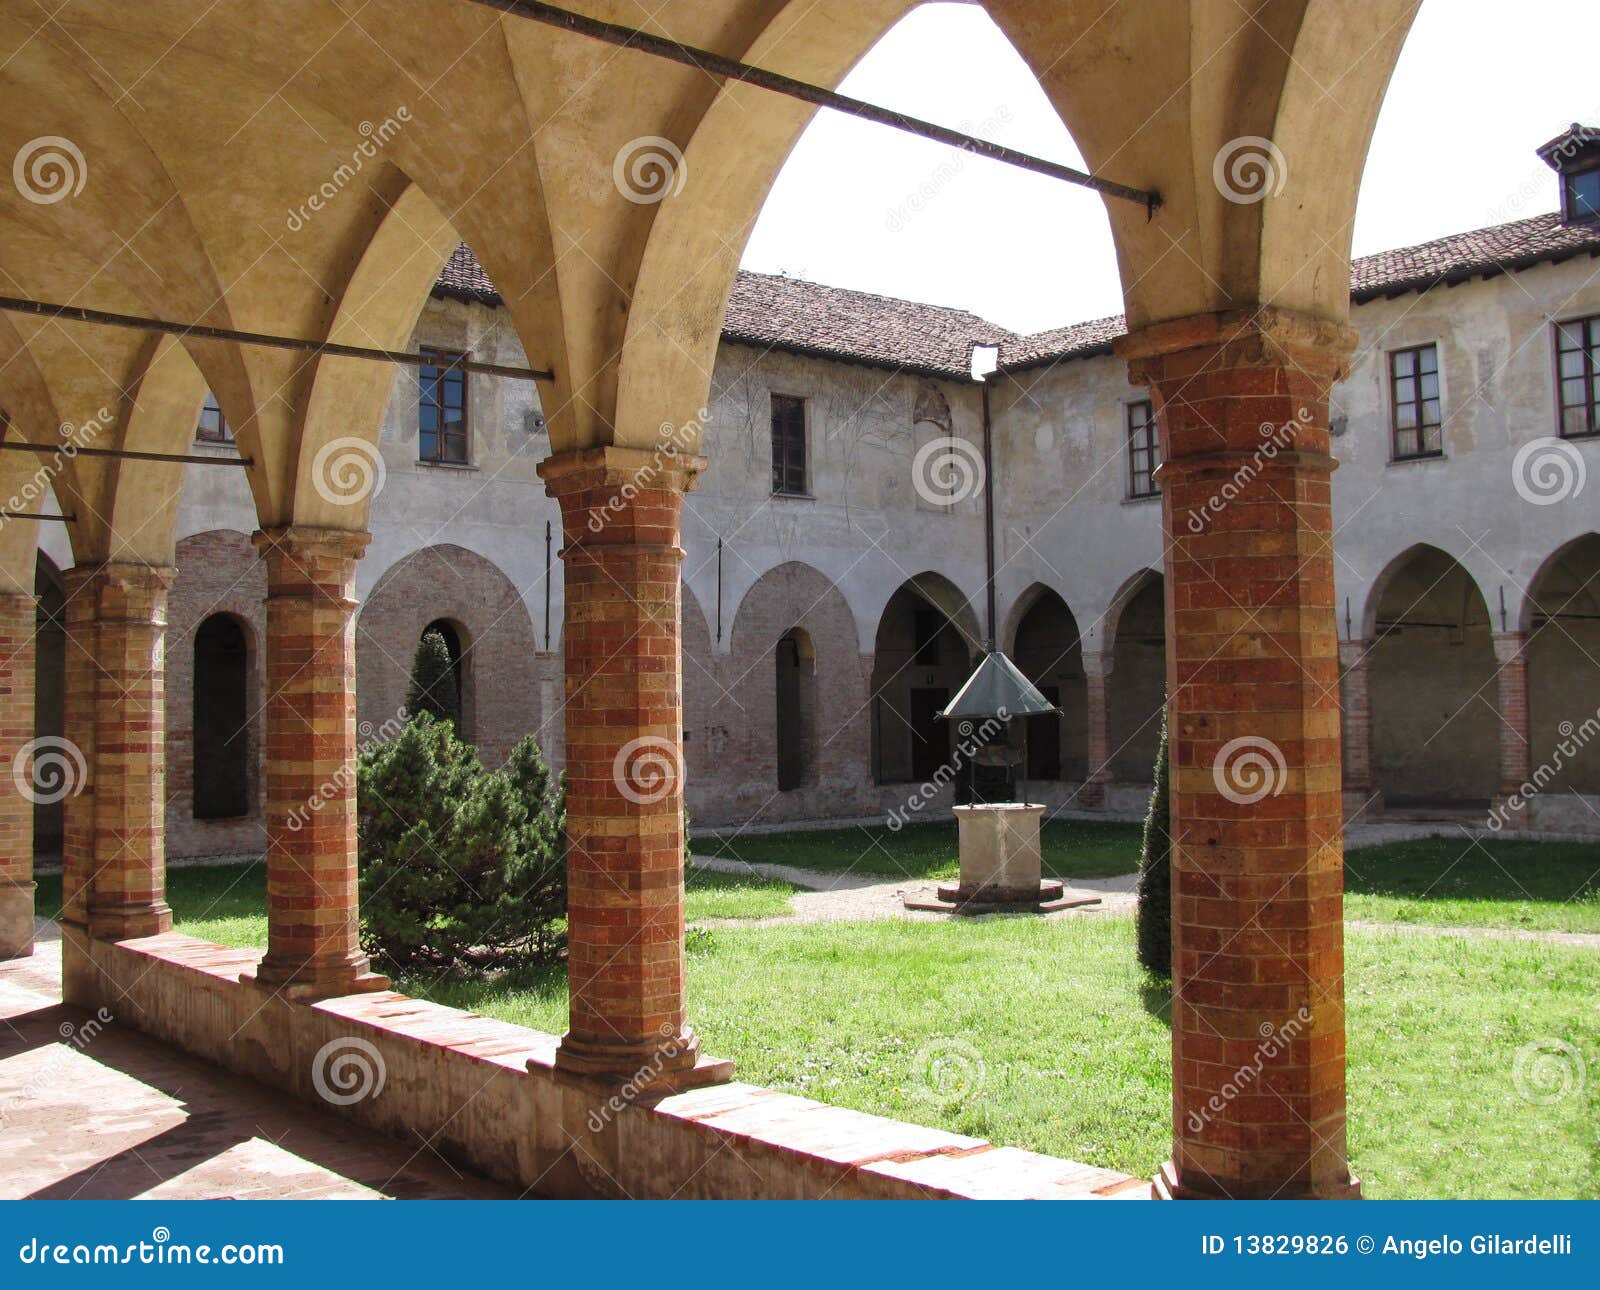 ancient cloister in crema, italy